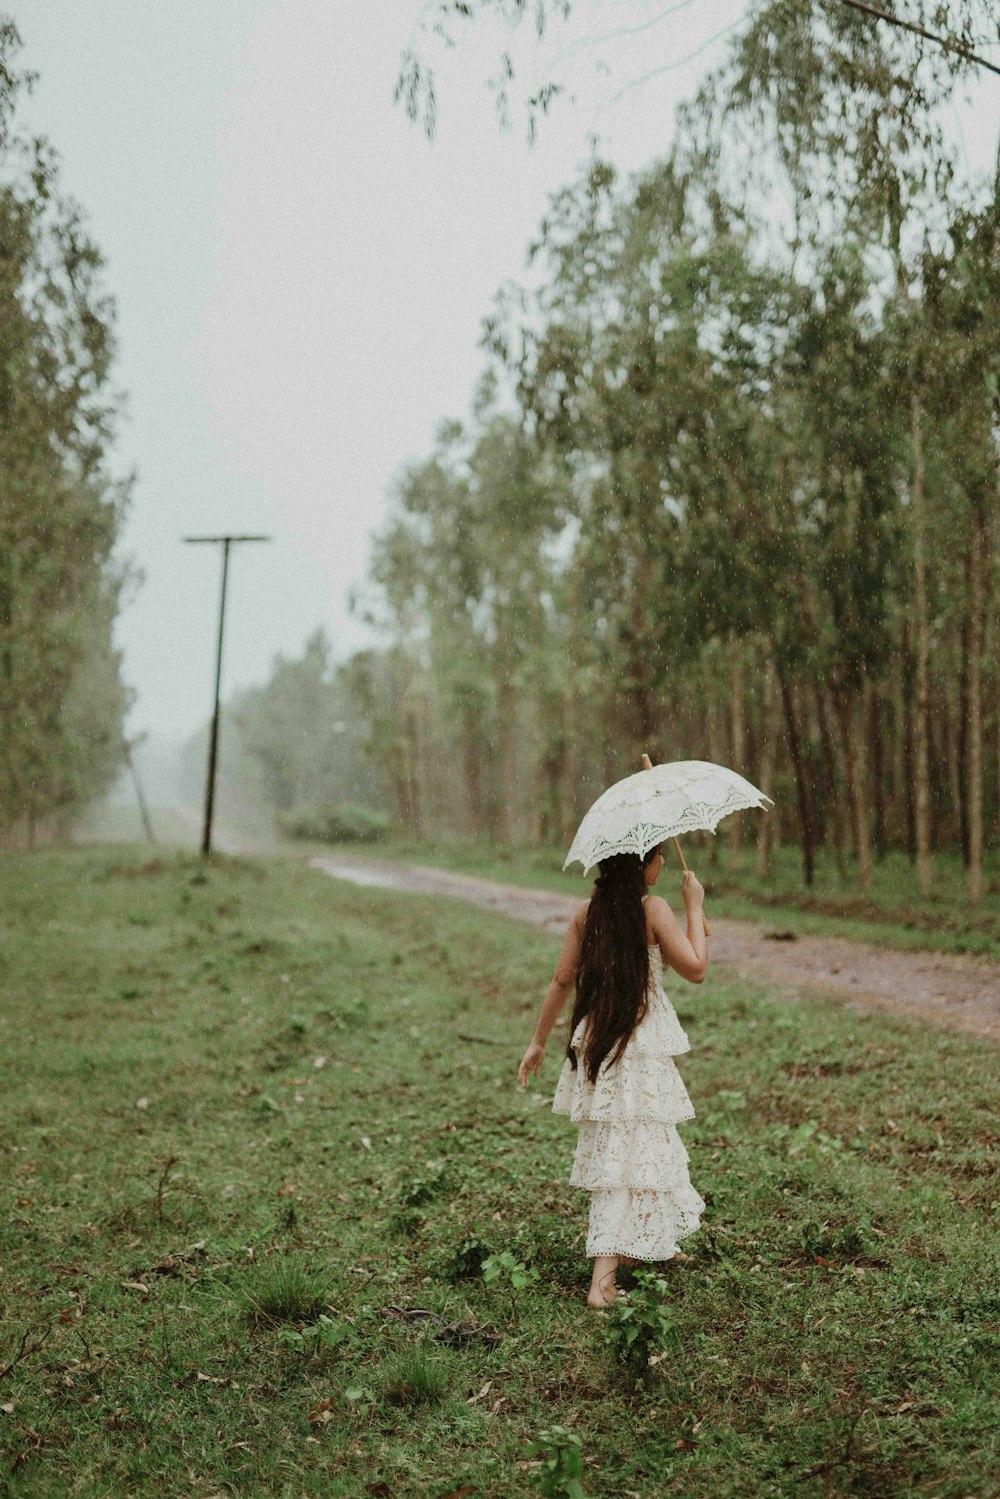 a girl in a white dress holding an umbrella